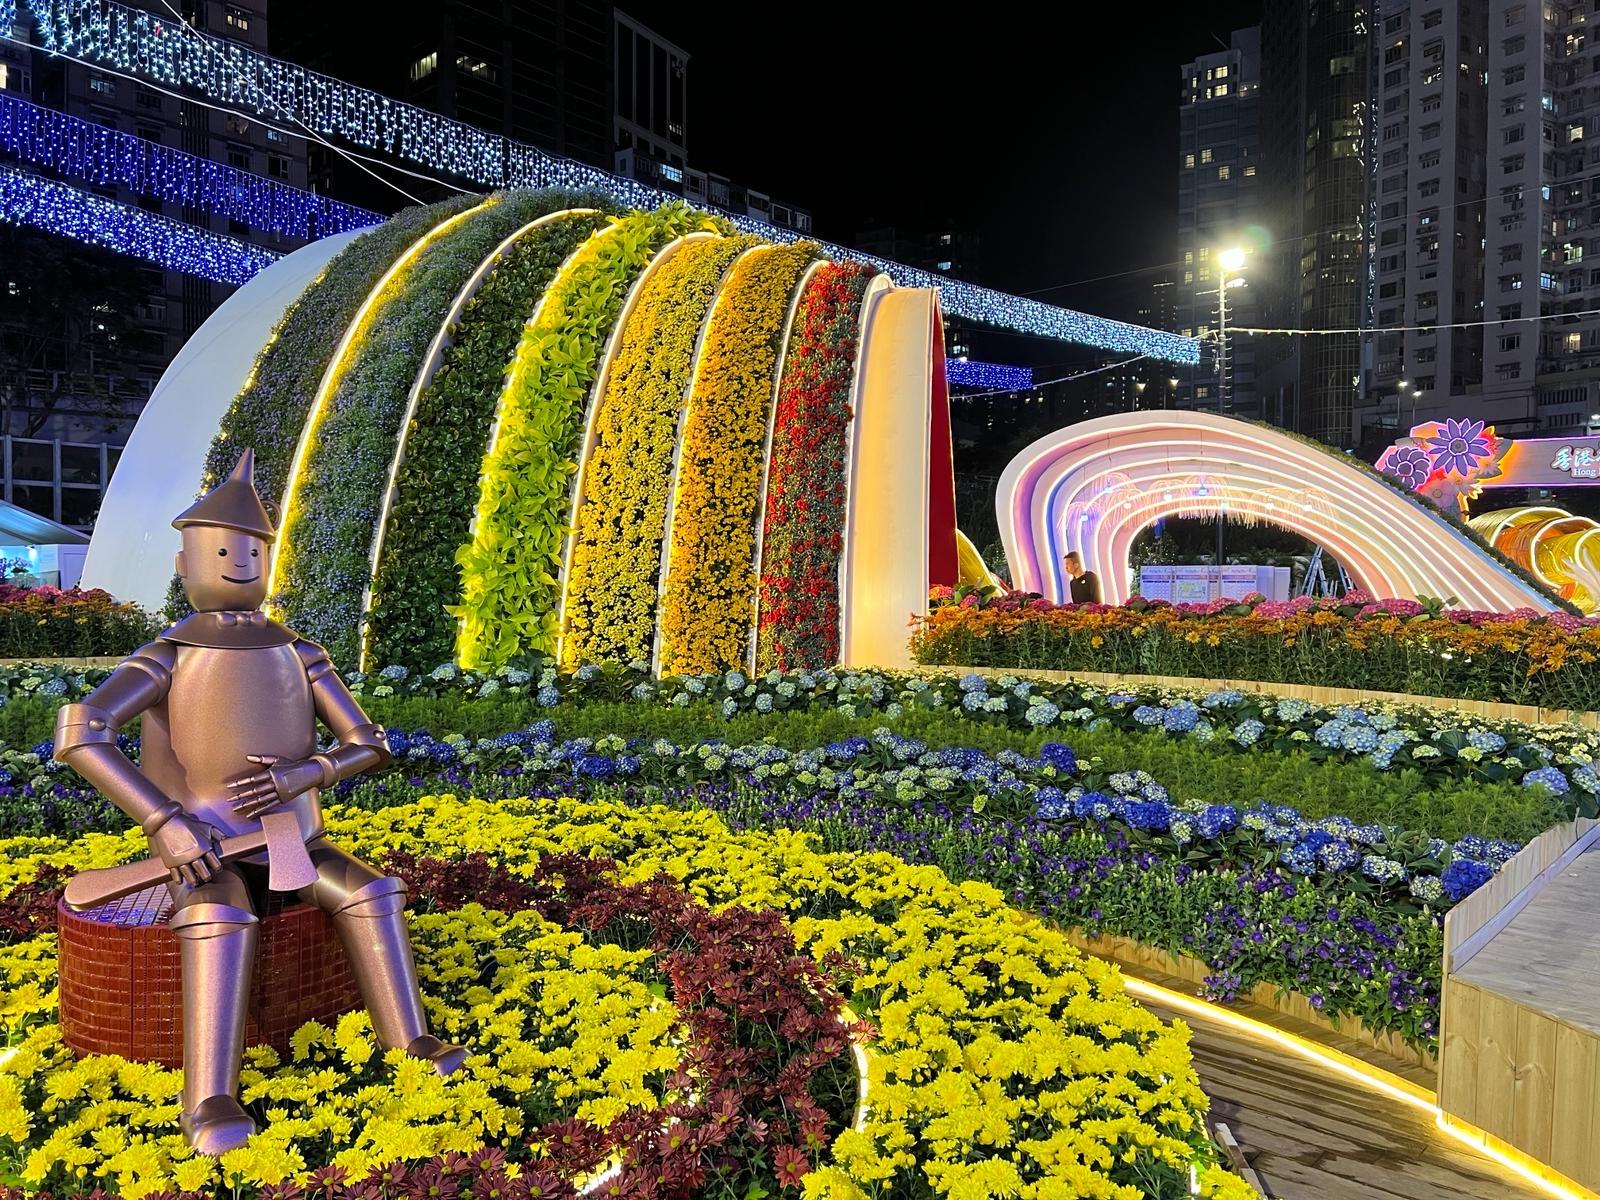 The annual Hong Kong Flower Show extravaganza opened at Victoria Park today (March 15) with some 420 000 flowers on display, including about 40 000 angelonias as the theme flower. The Wizard of Oz garden plot offers a different view as night falls.